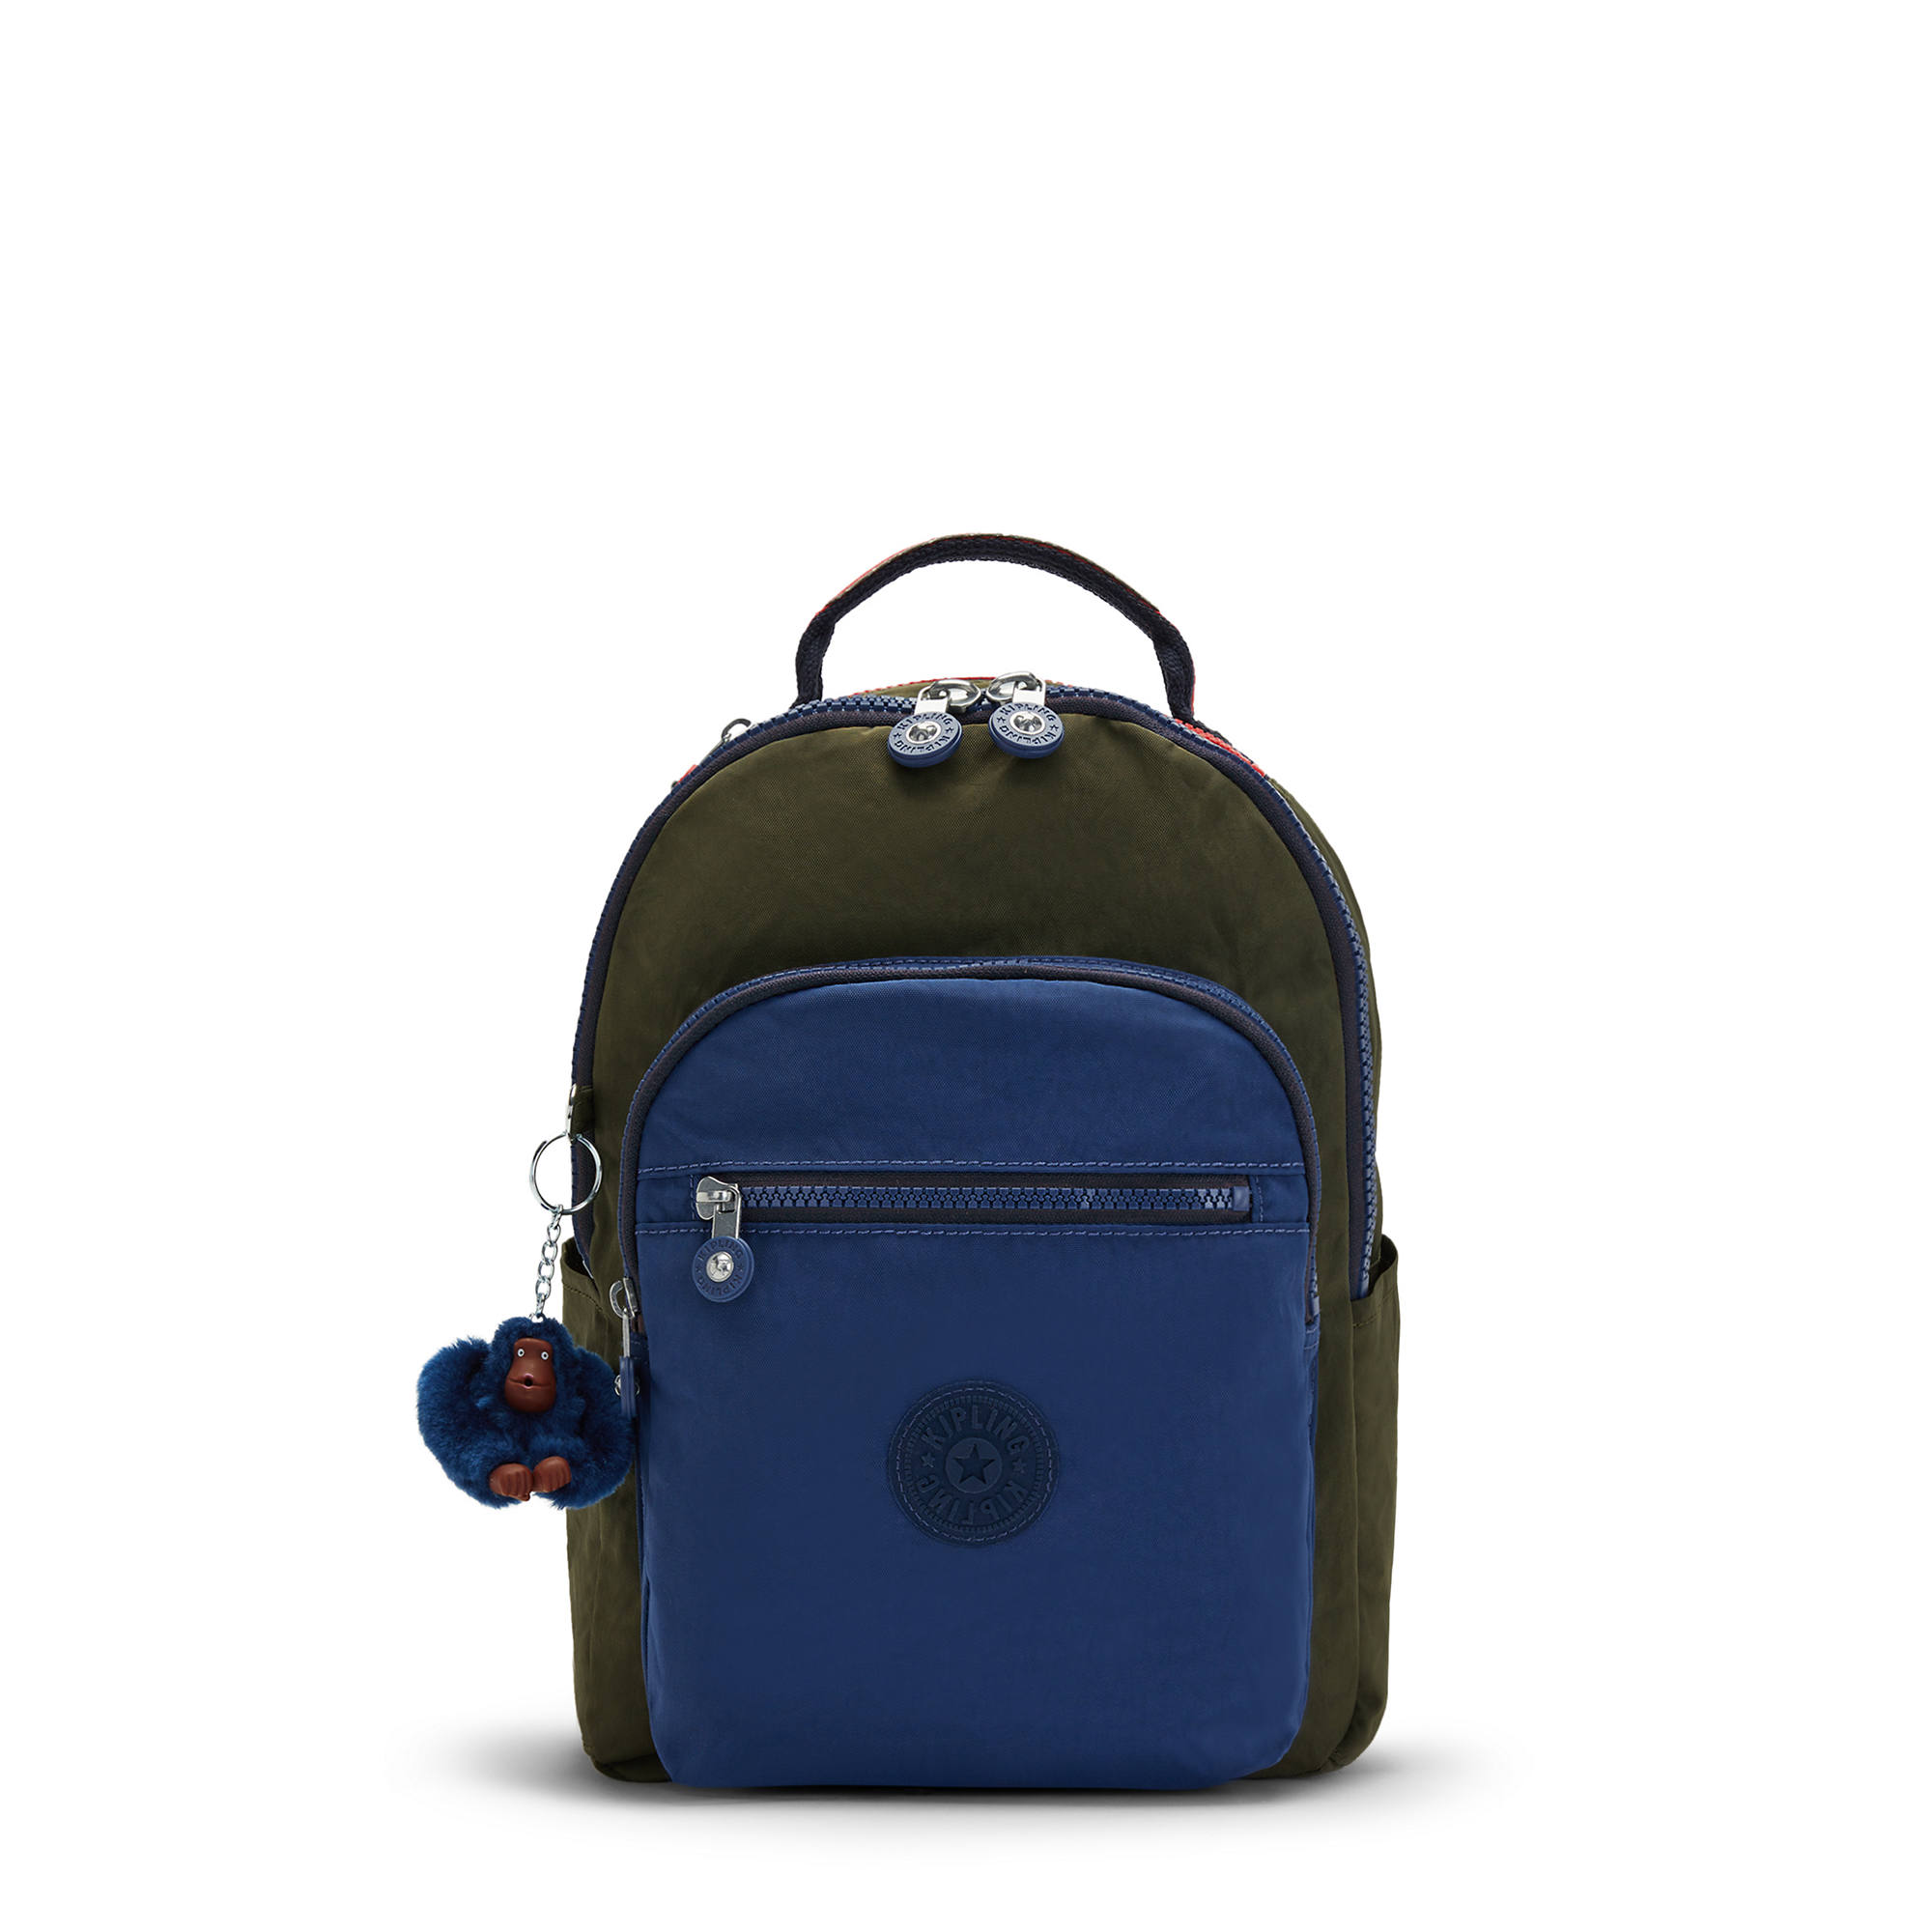 Seoul Small Tablet Backpack, Seaweed Green Blue, large-zoomed